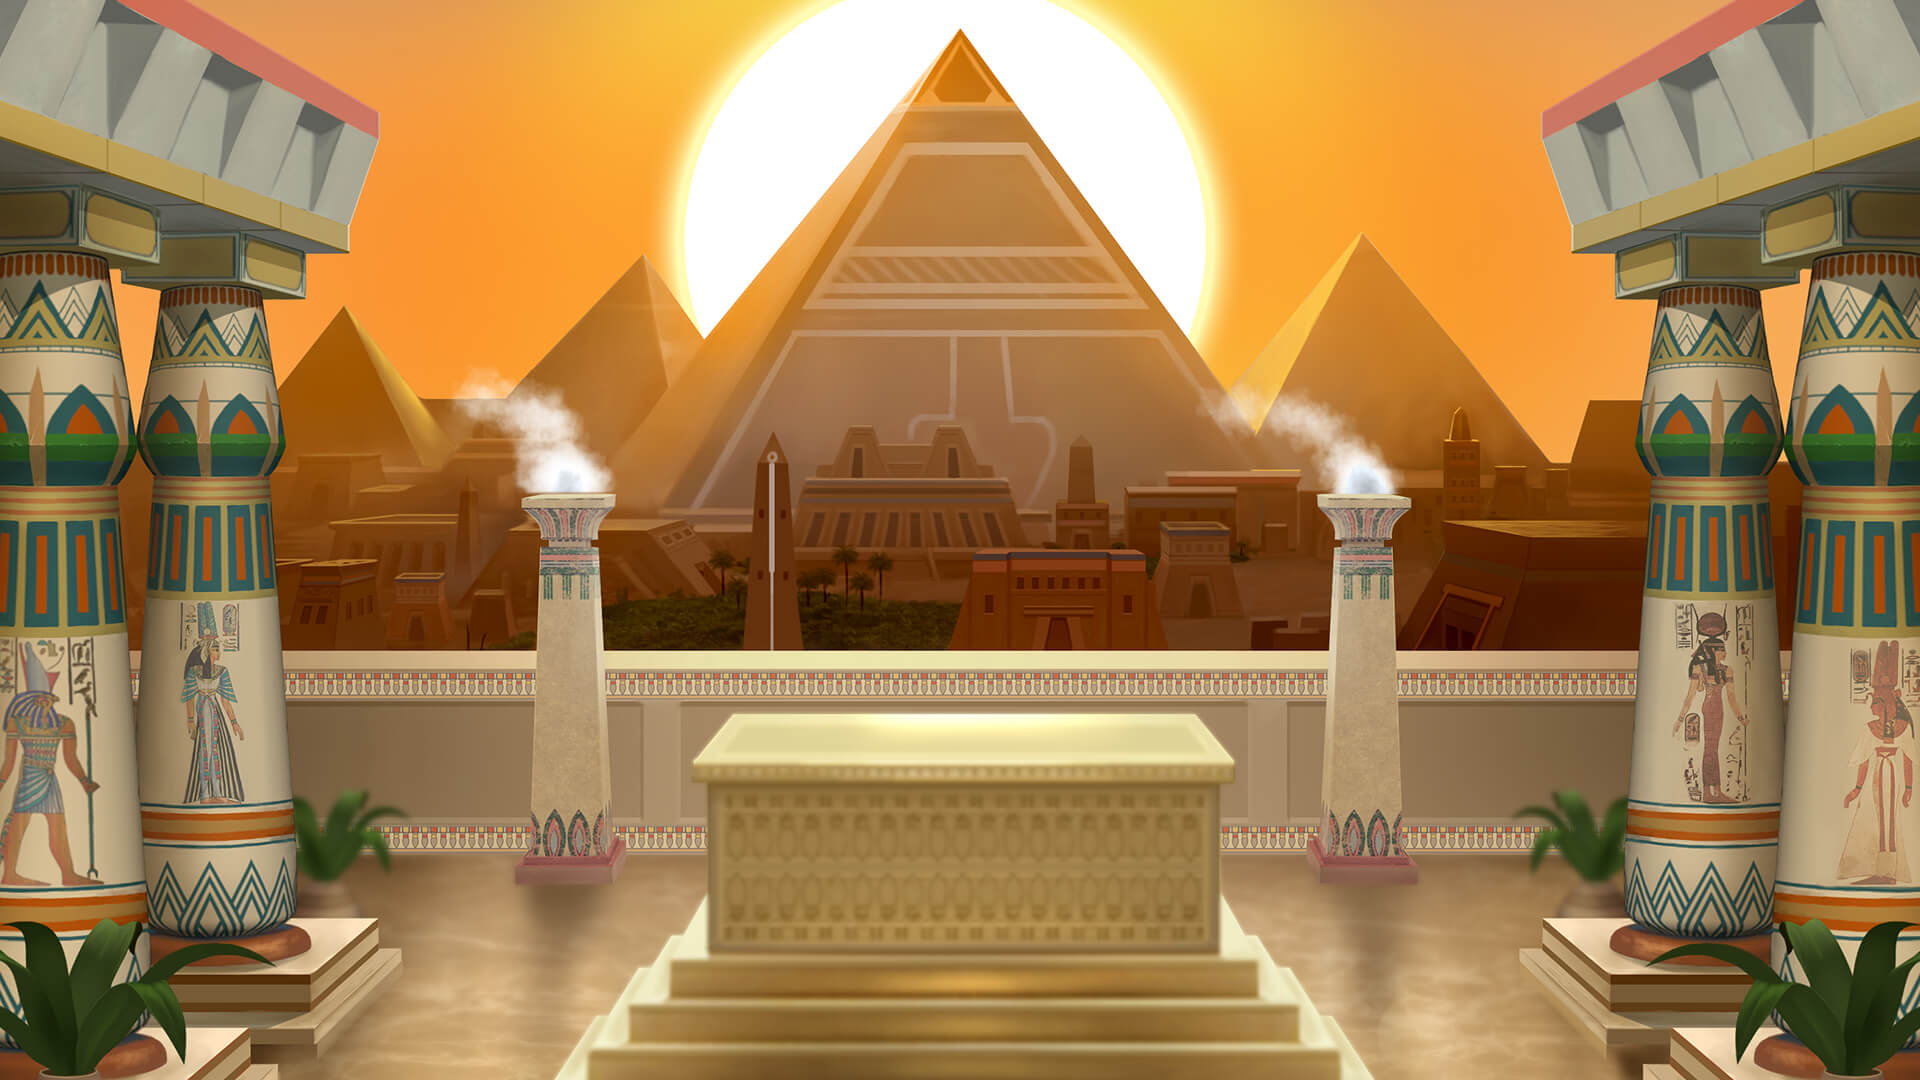 Game hight resolution background Legacy of Egypt